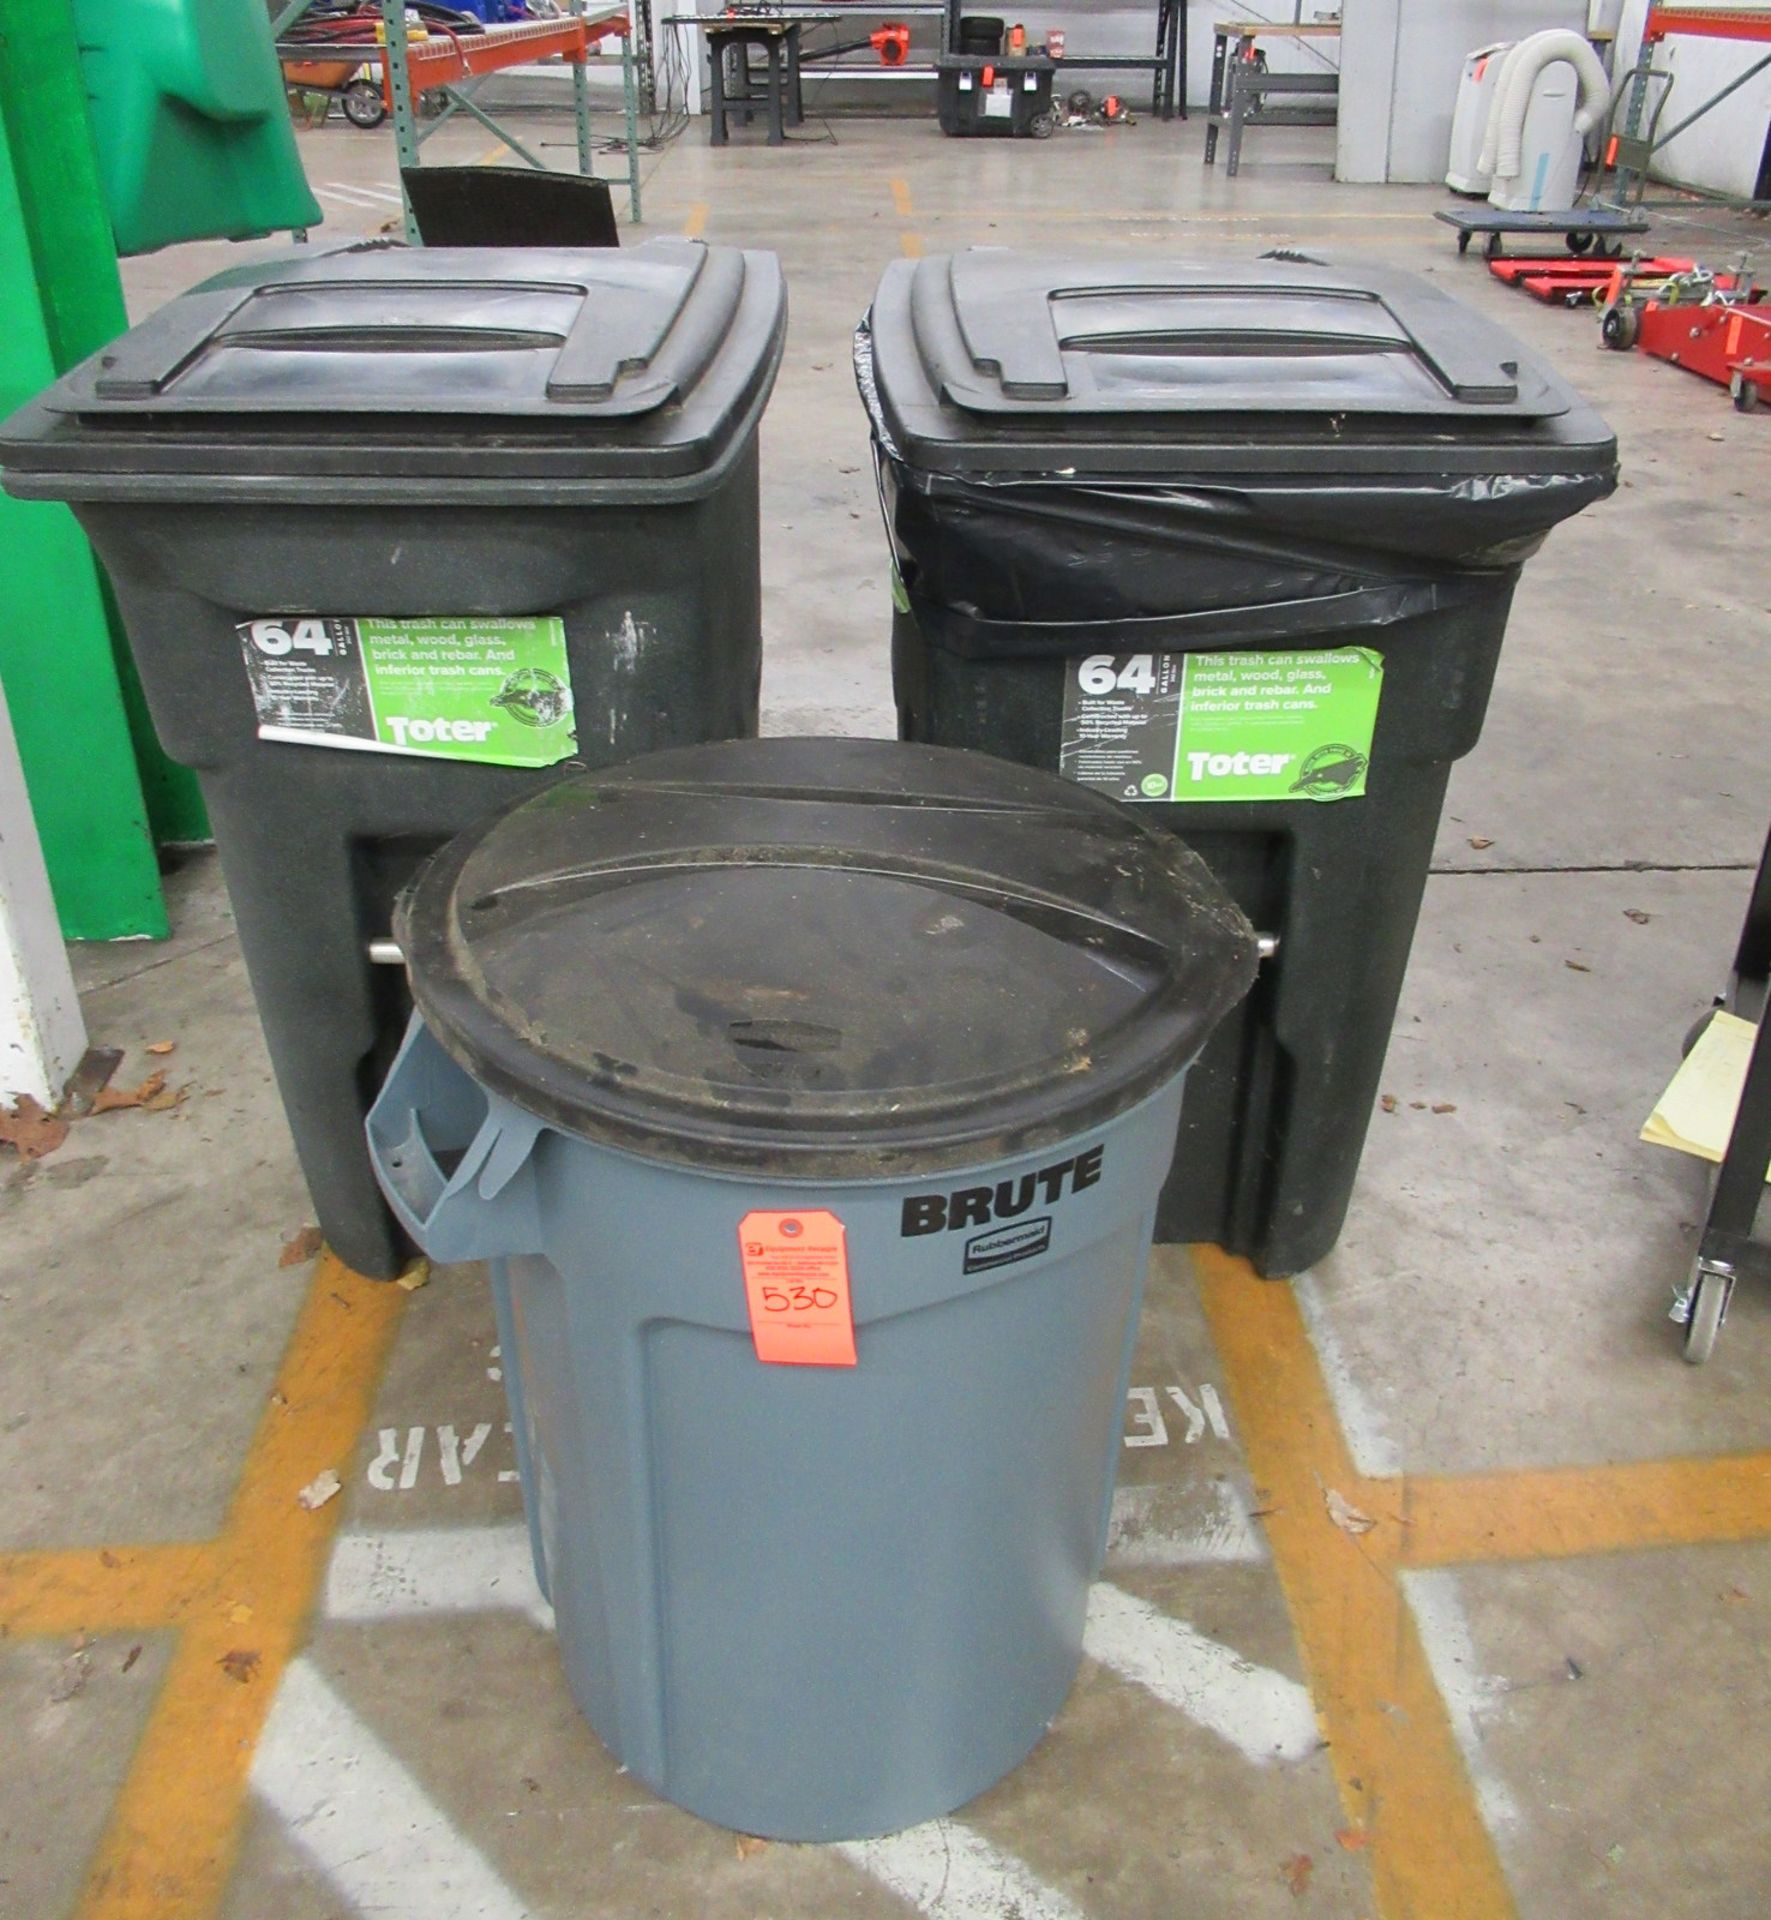 64 Gallon Toter & Brute Garbage Cans Lot of 3